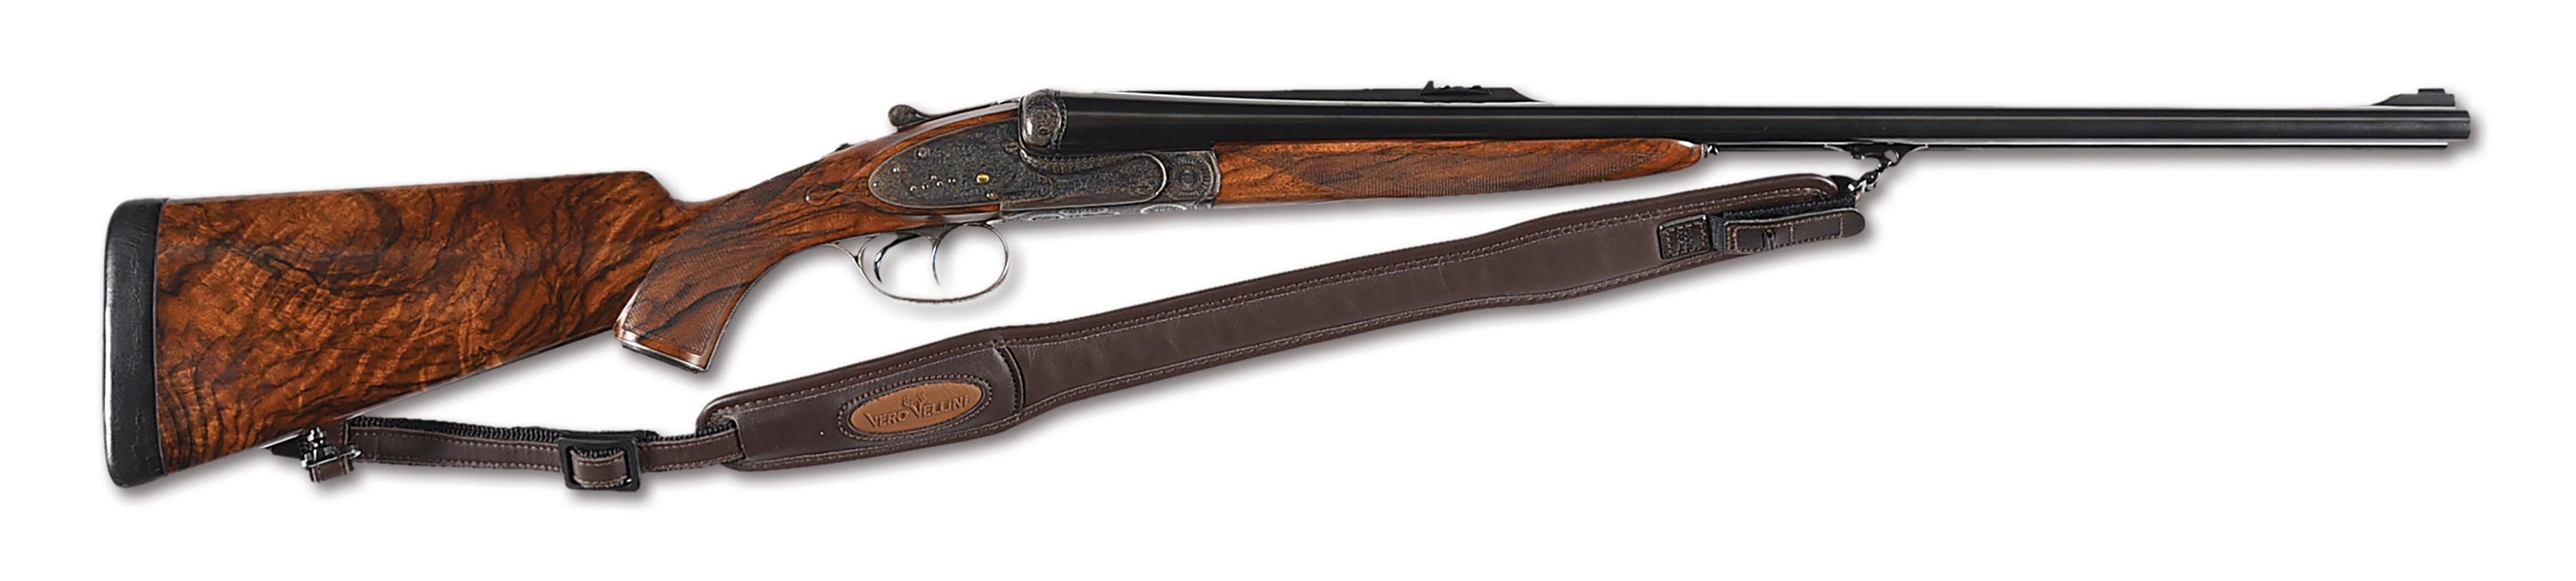 (M) LEBEAU COURALLY .470 NITRO EXPRESS SIDE BY SIDE DOUBLE RIFLE WITH ENGRAVING BY MAISSIN, WINNER OF THE ORDER OF EDWARDIAN GUNNERS GOLD MEDAL IN 2003, GOLD MEDAL NRA MUSEUM, WITH CASE.